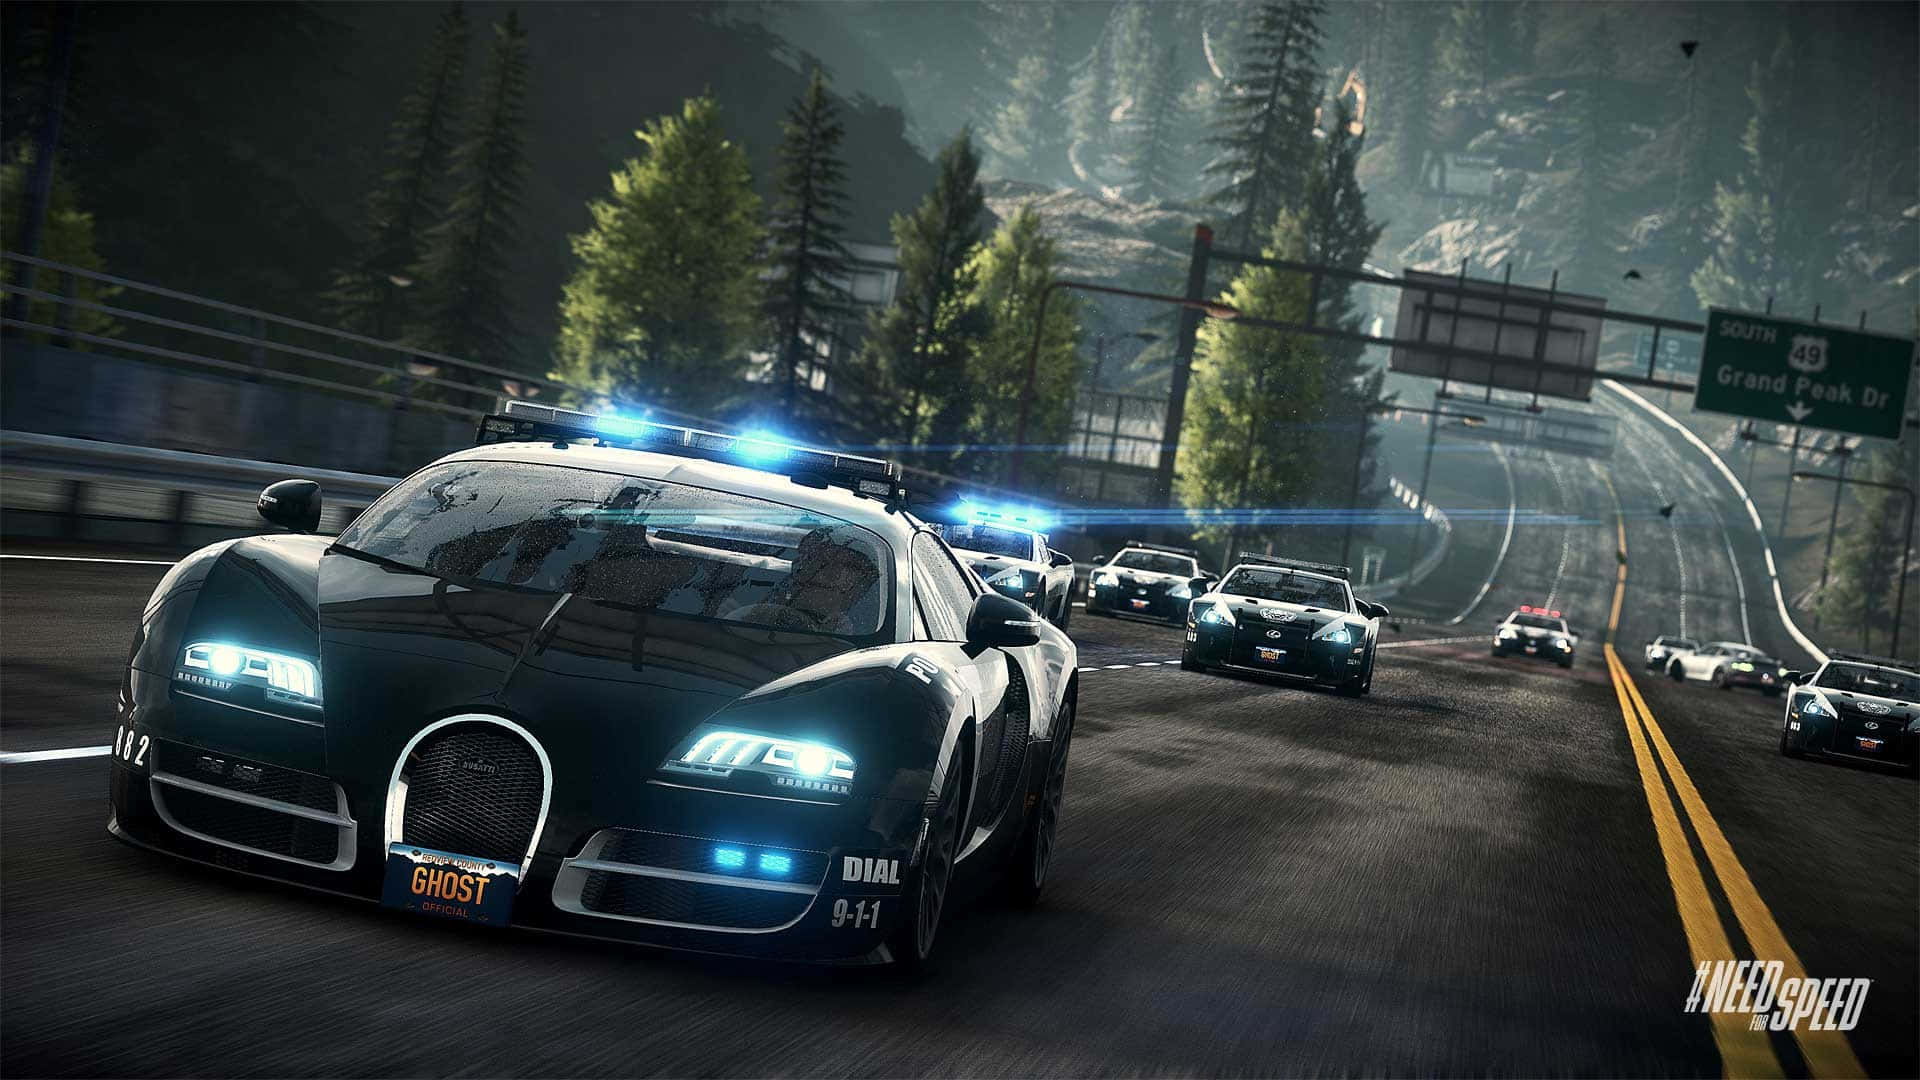 Hit the accelerator and speed ahead in the Best Need For Speed game